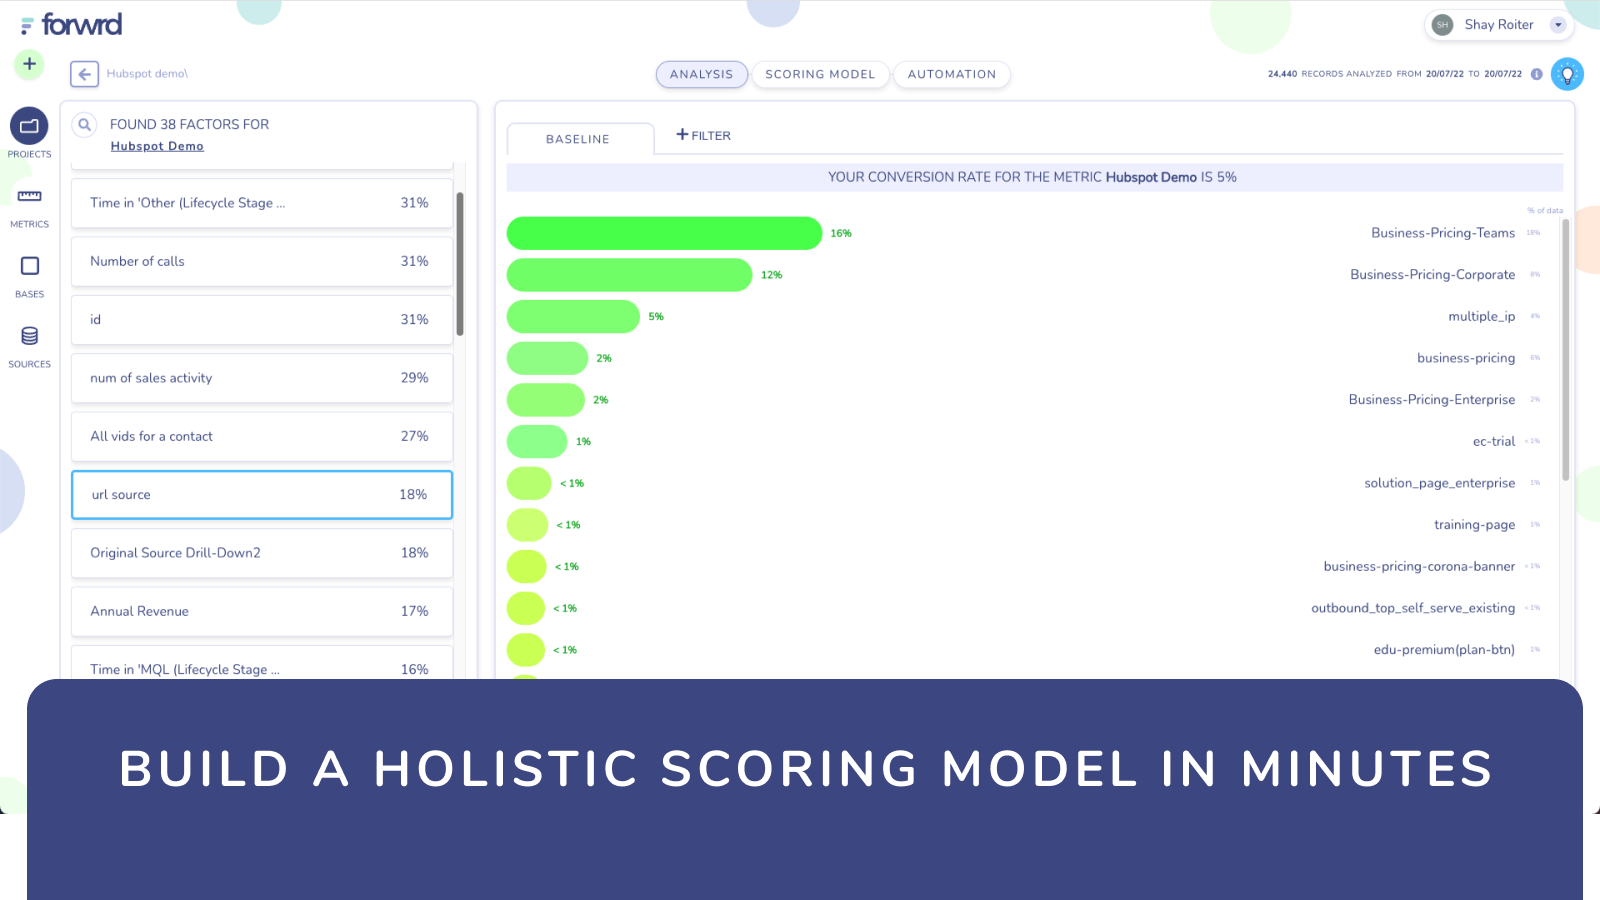 Build a holistic scoring model in minutes.